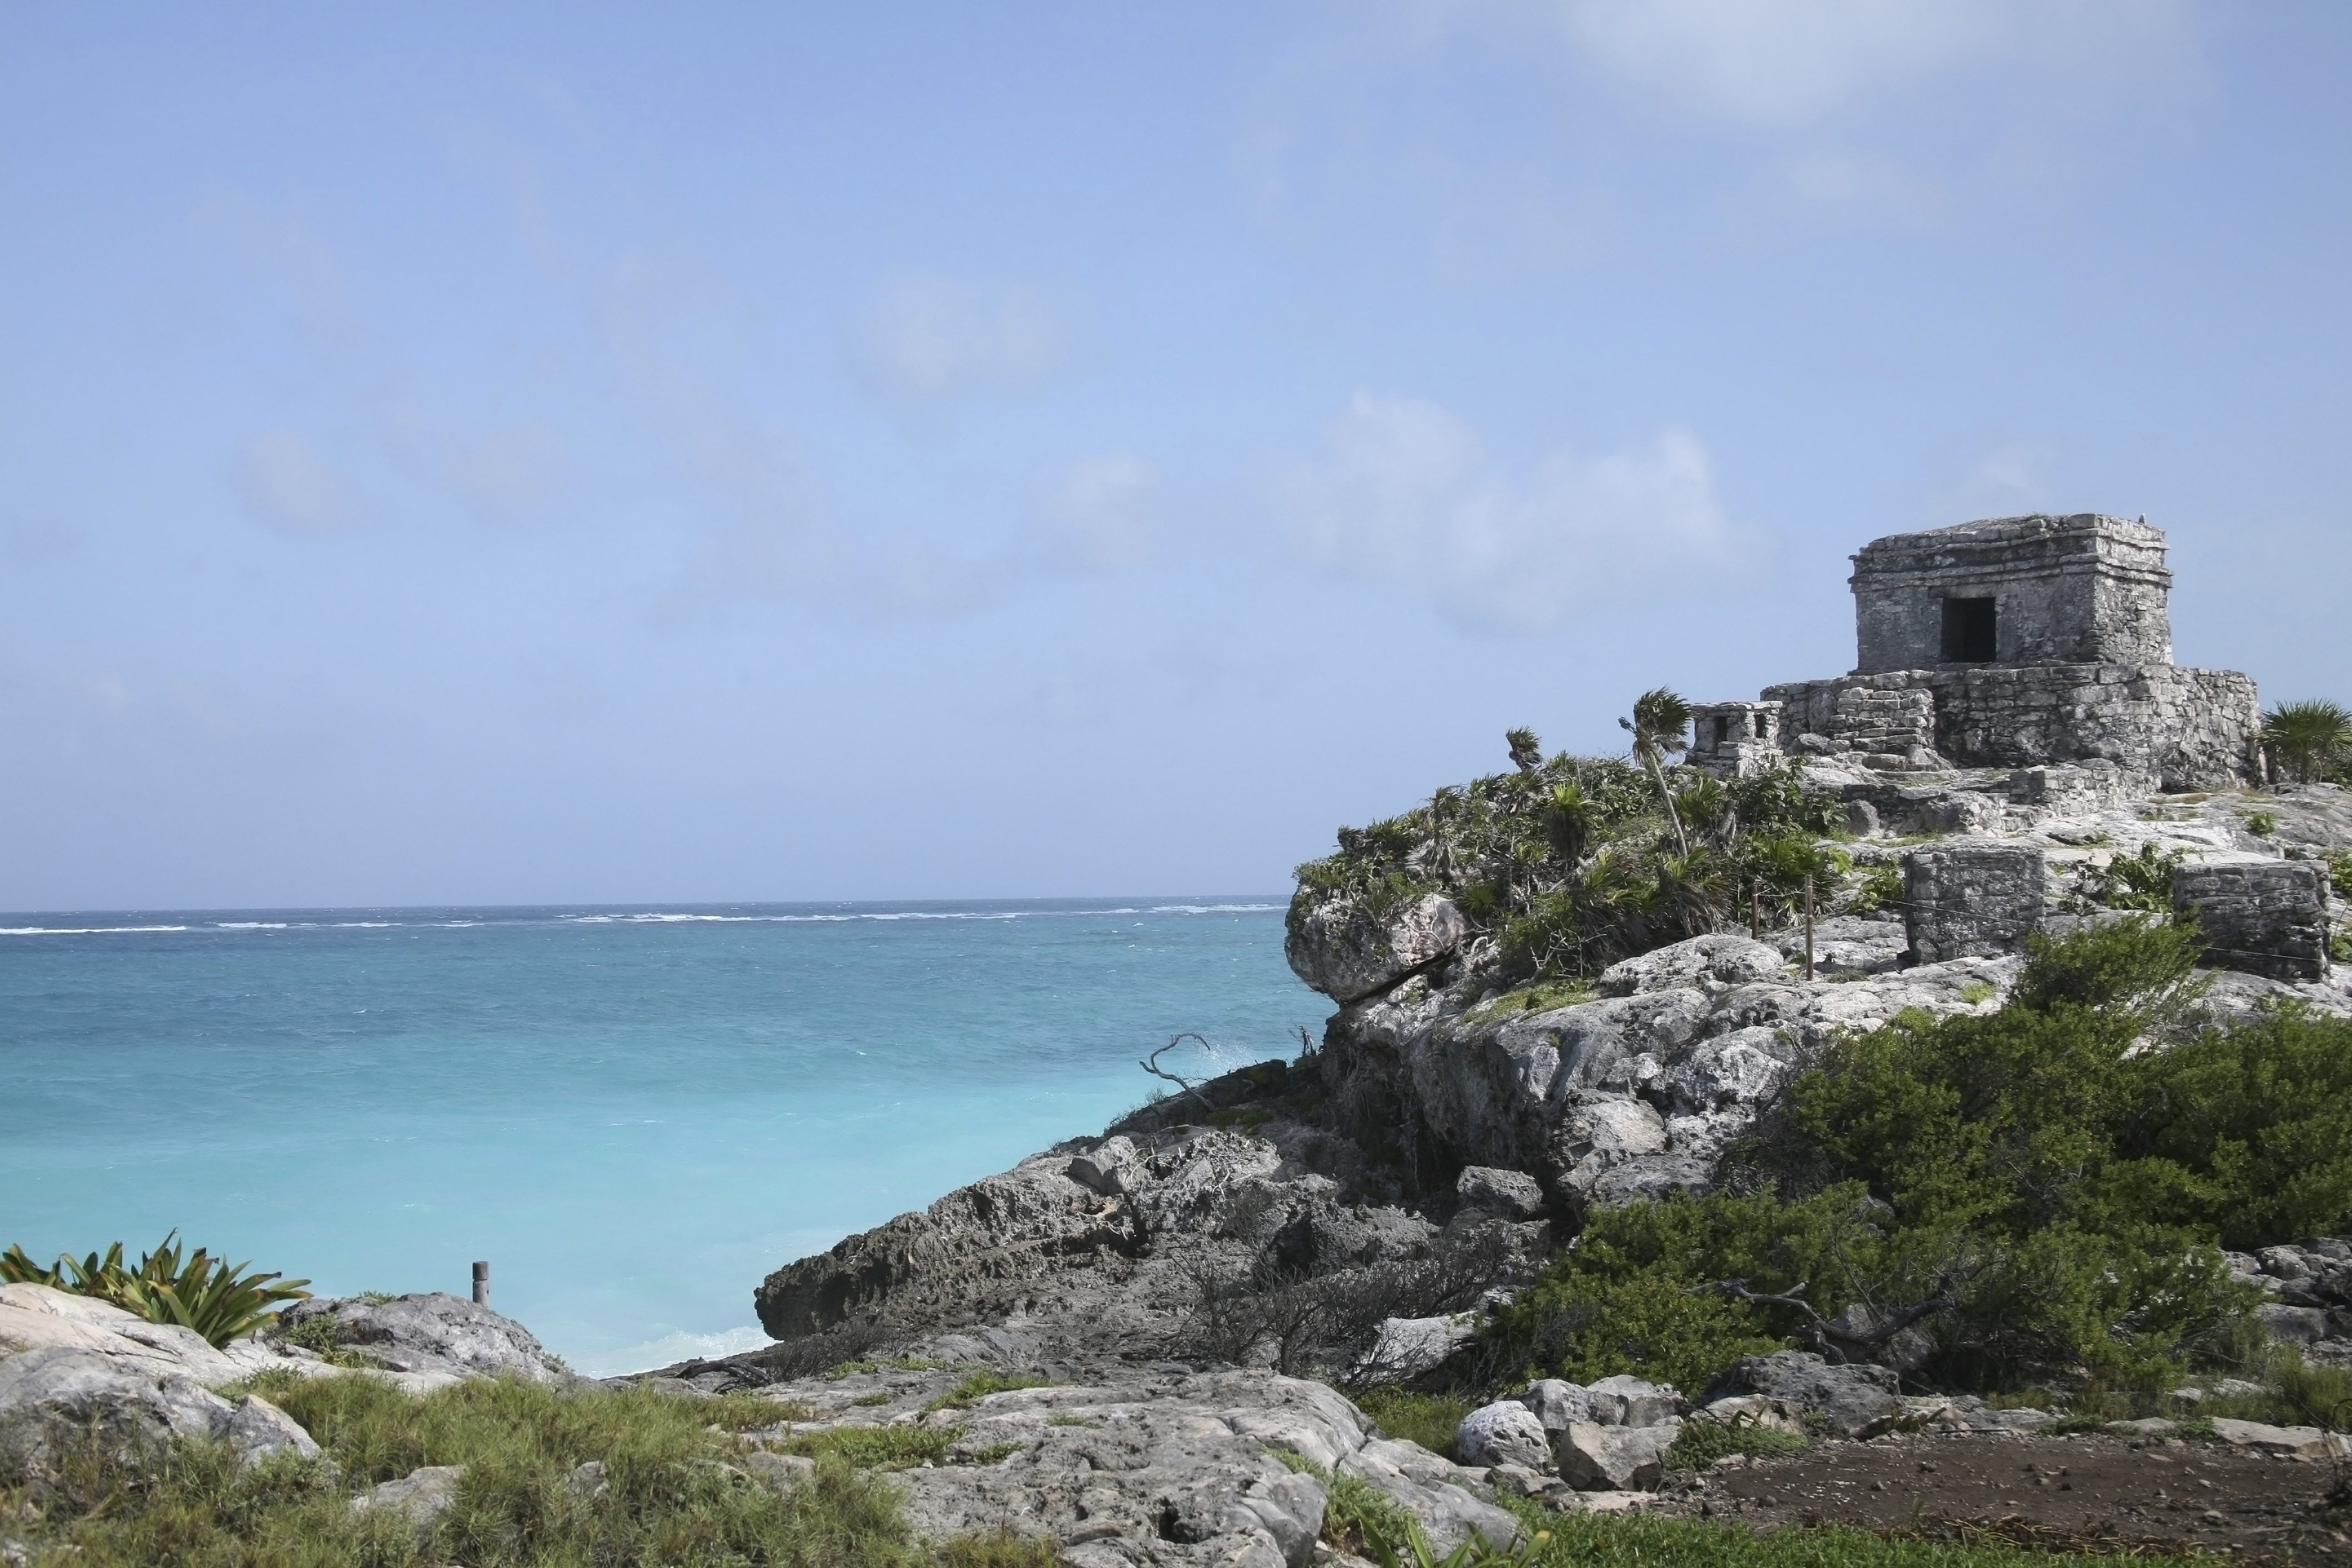 Tulum combines fascinating ancient ruins with beautiful sandy beaches